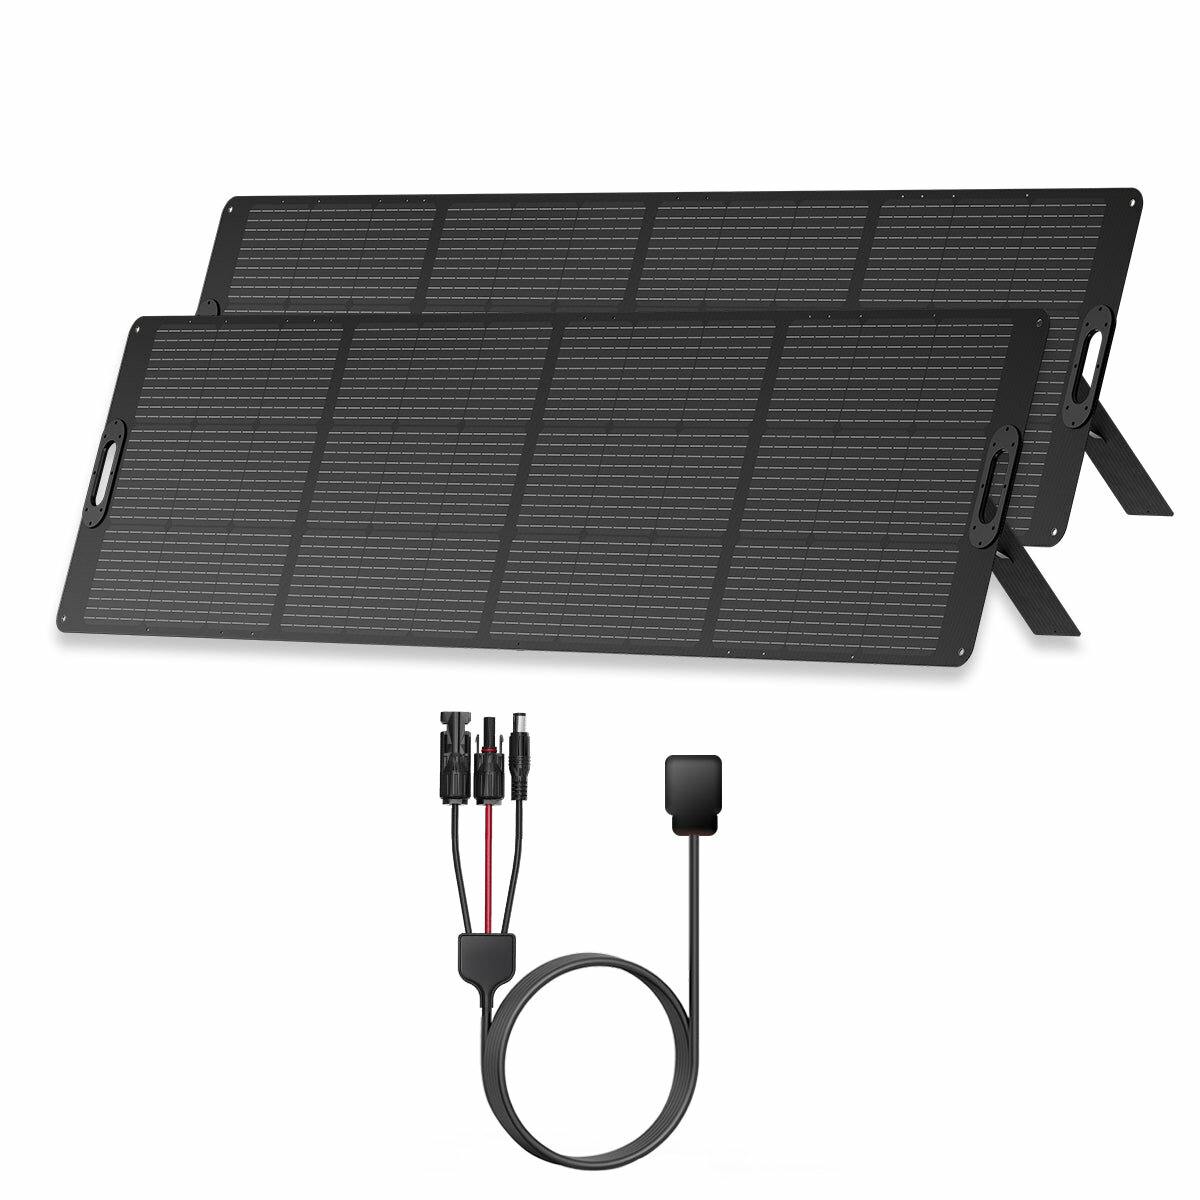 [US Direct] 2pcs OUPES PV-240 240W Solar Panel For Portable Power Station with Adjustable Stand Foldable Solar Backup Power Solar Charger for Outdoor Camping